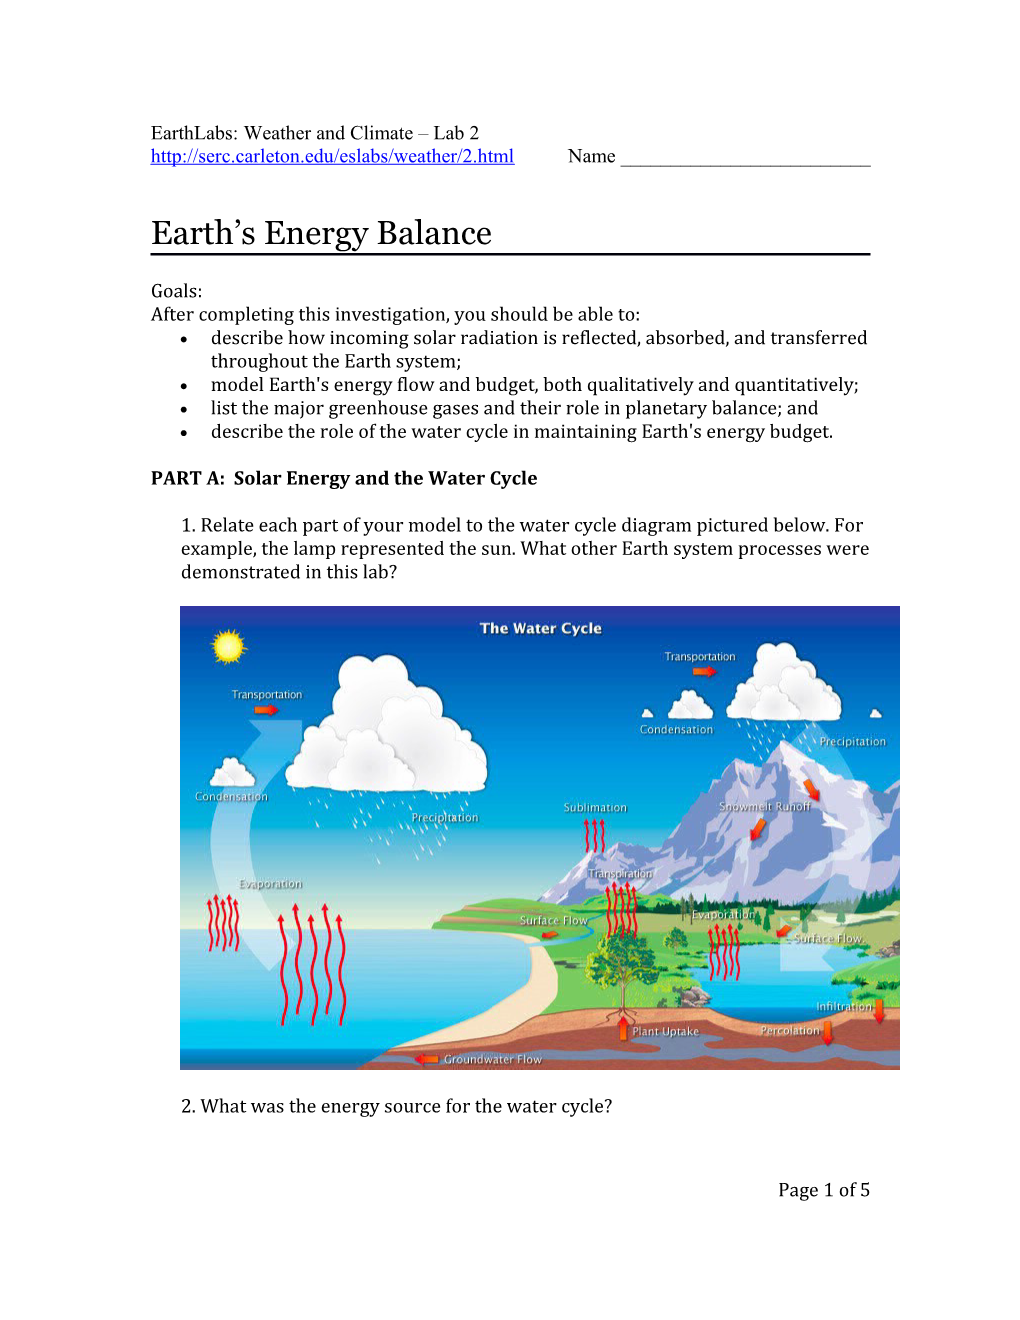 Earthlabs: Weather and Climate Lab 2